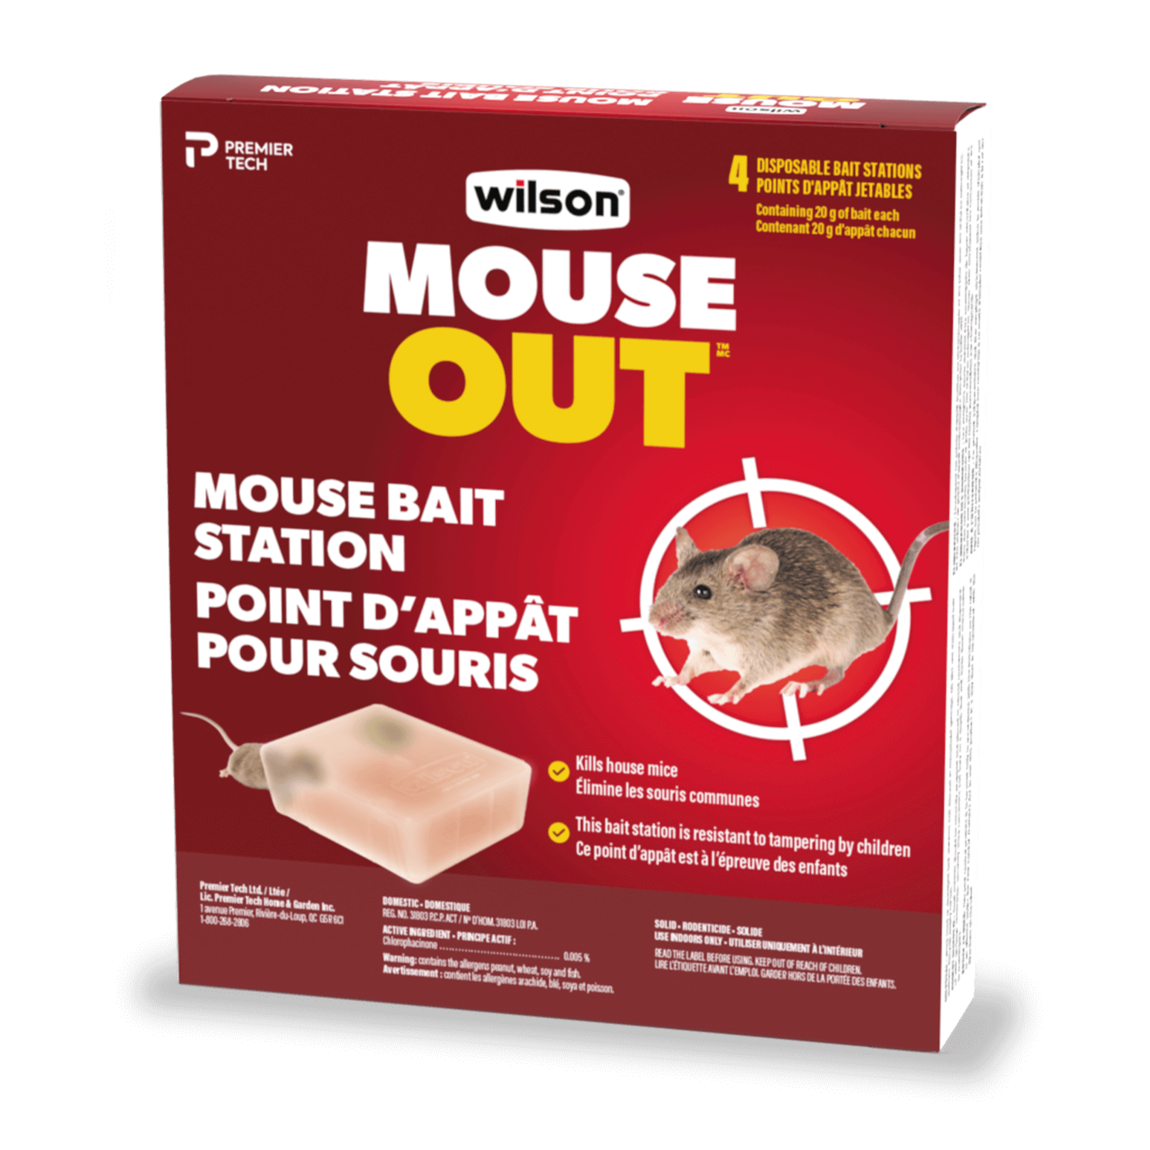 Wilson MouseOut Warfarin Indoor Prefilled Single-Use Disposable